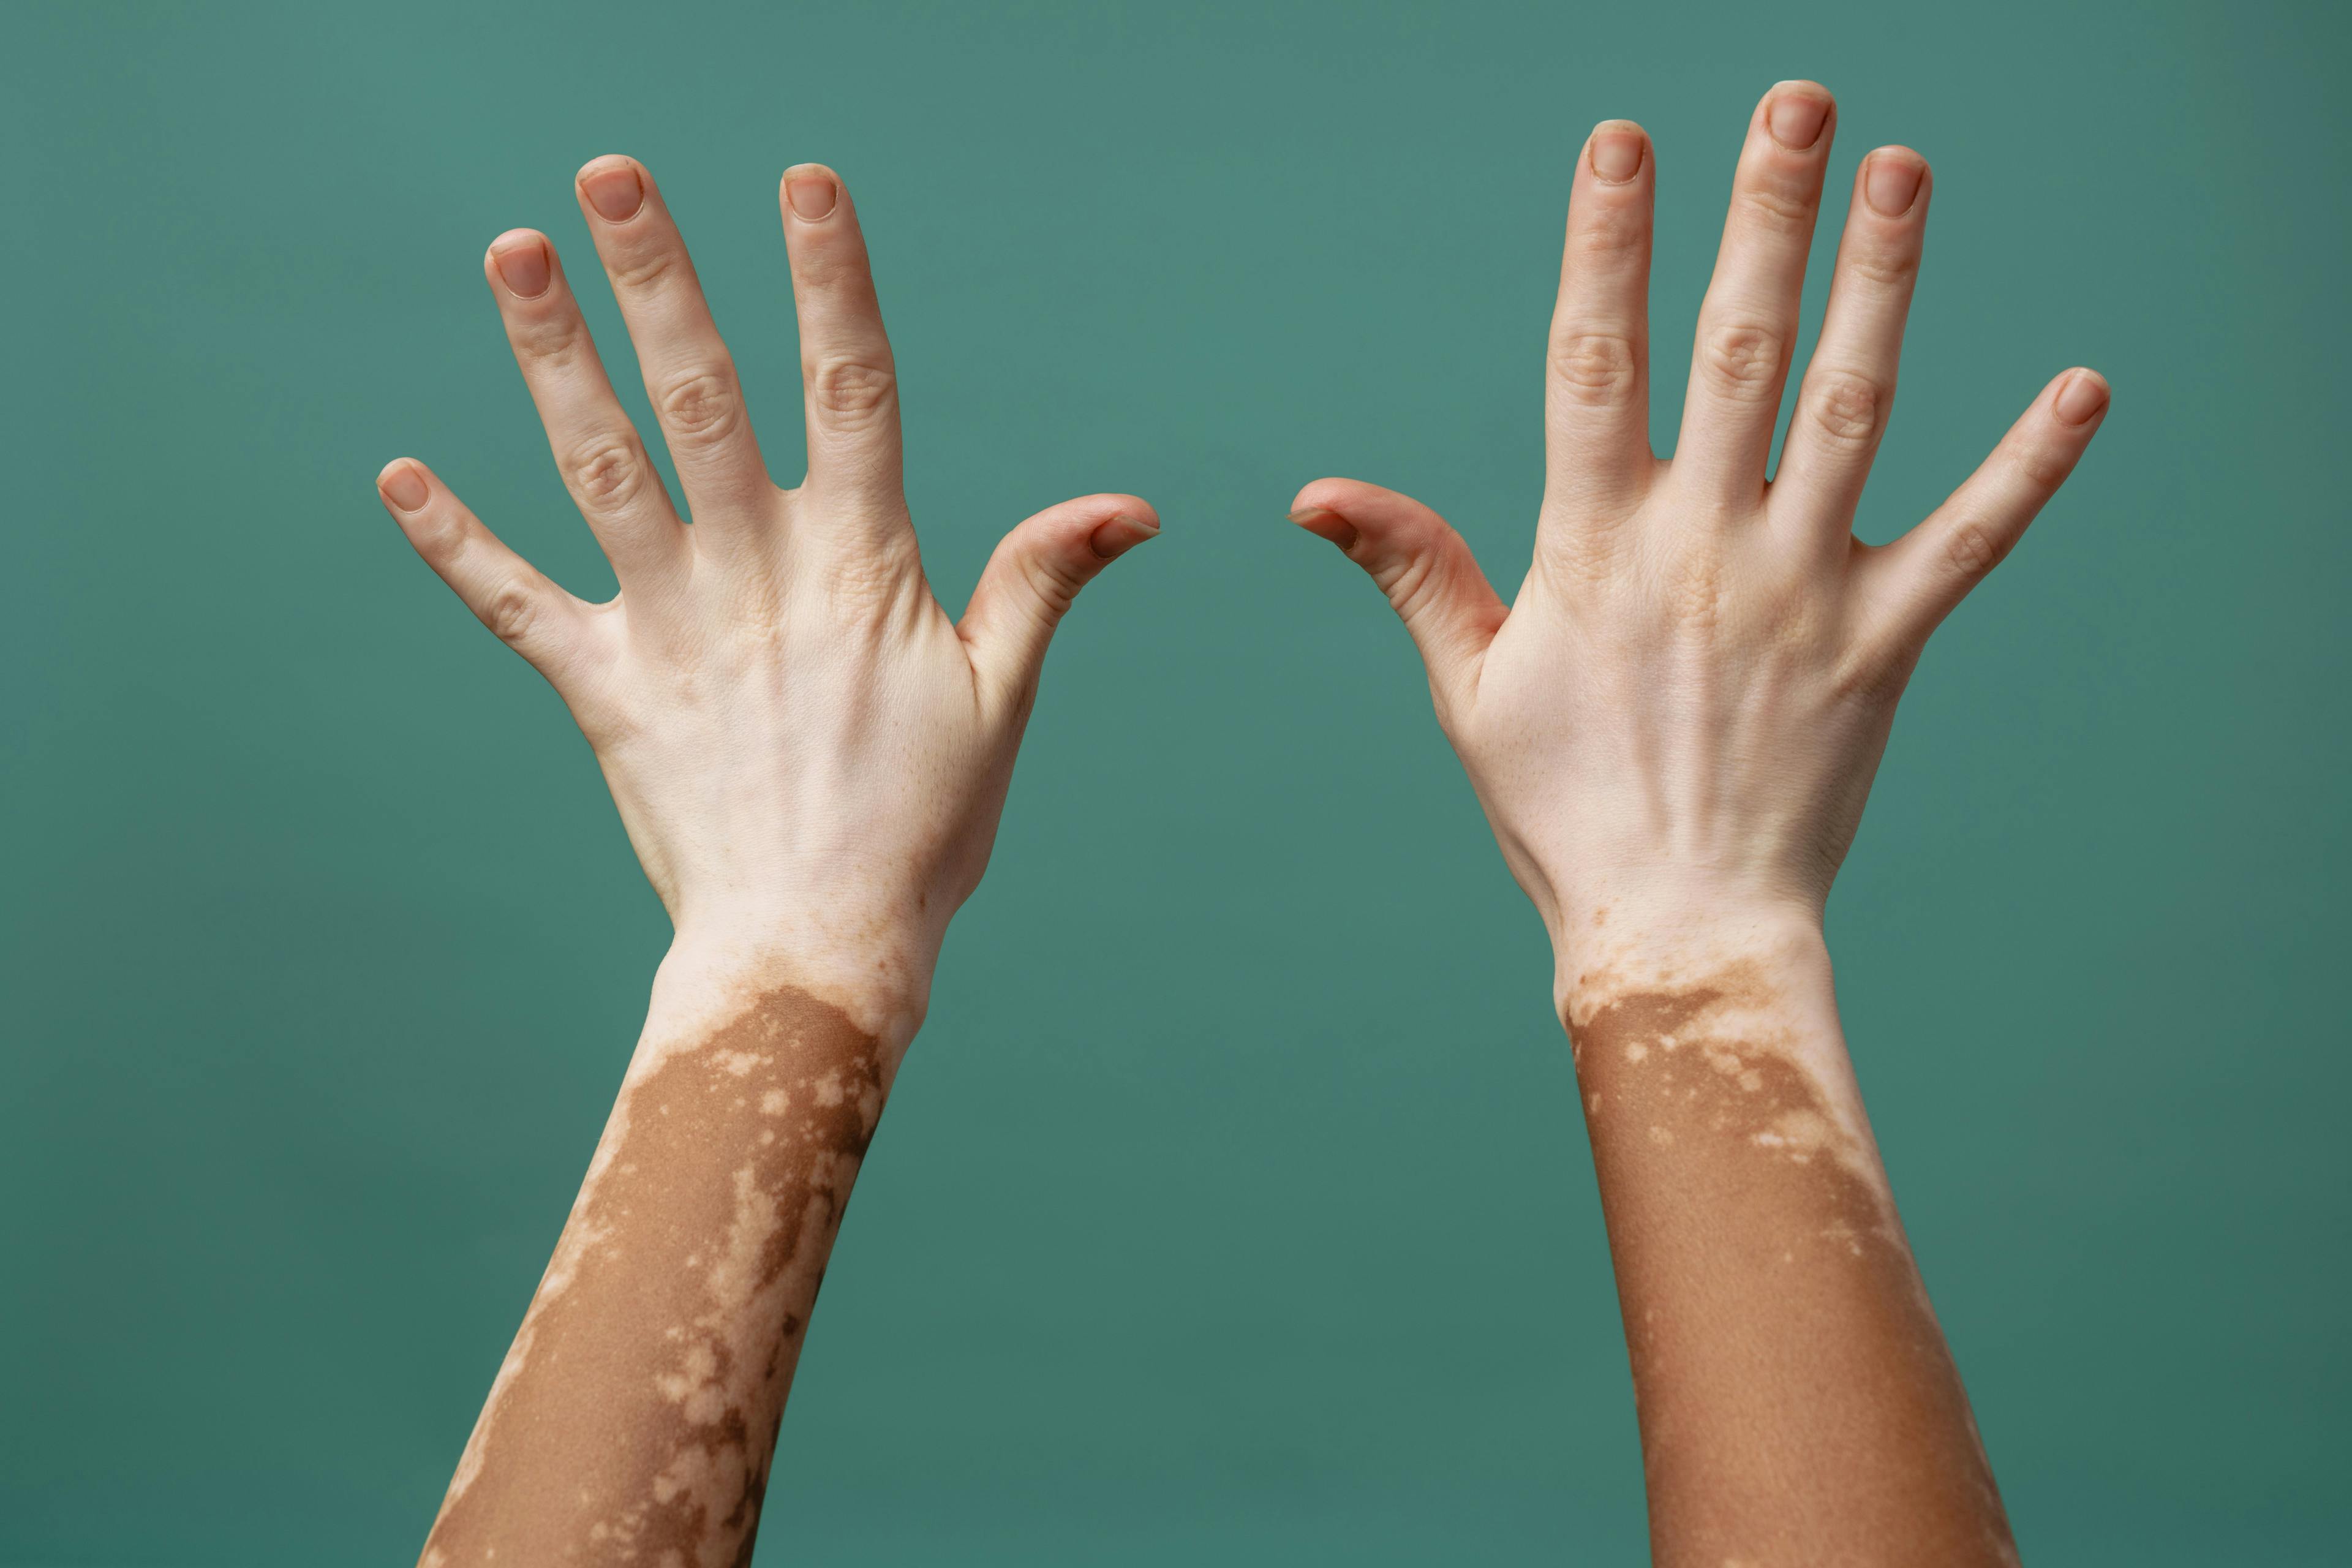 Researchers have discovered genes tied to melanin production, which could lead to new drugs for vitiligo and other pigmentation diseases. (Image credit: ©Drobot Dean - stock.adobe.com)